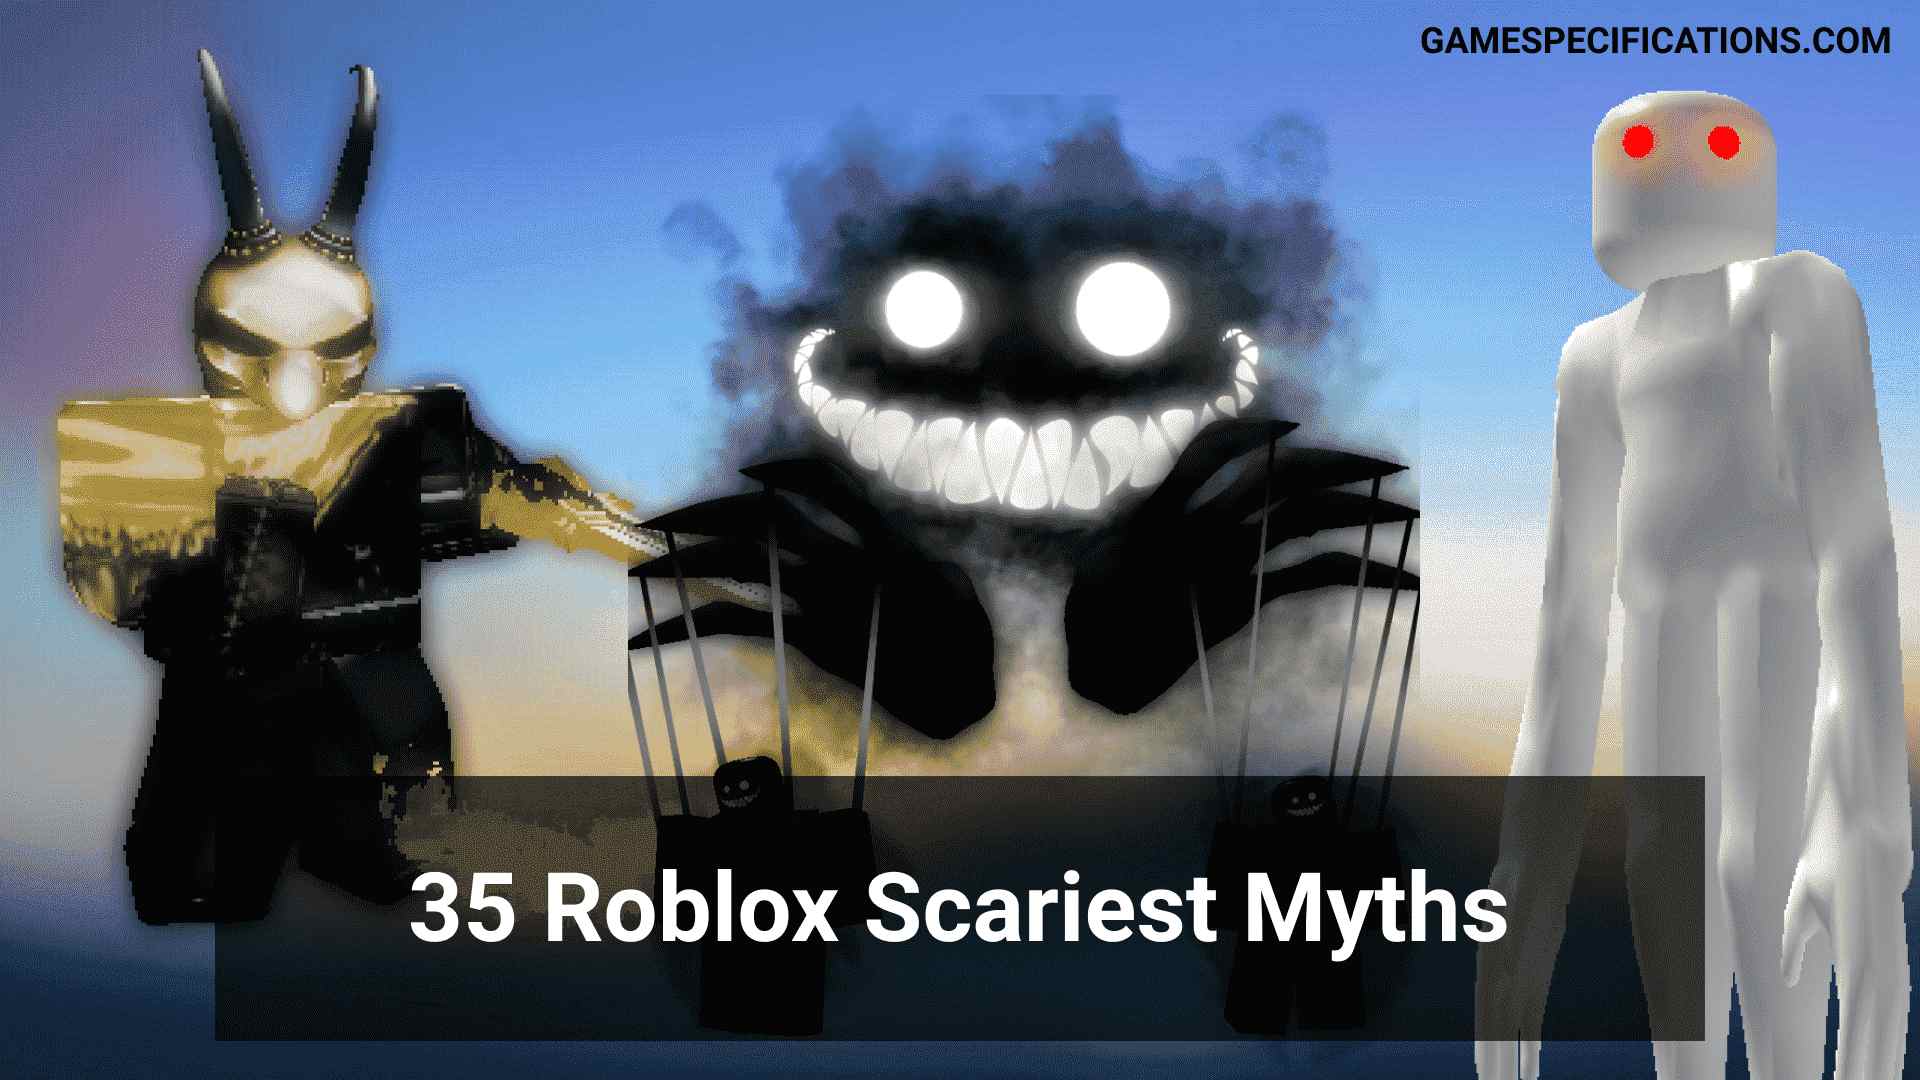 Roblox Myths A Scary Universe Of Roblox Game Specifications - 45229 roblox user